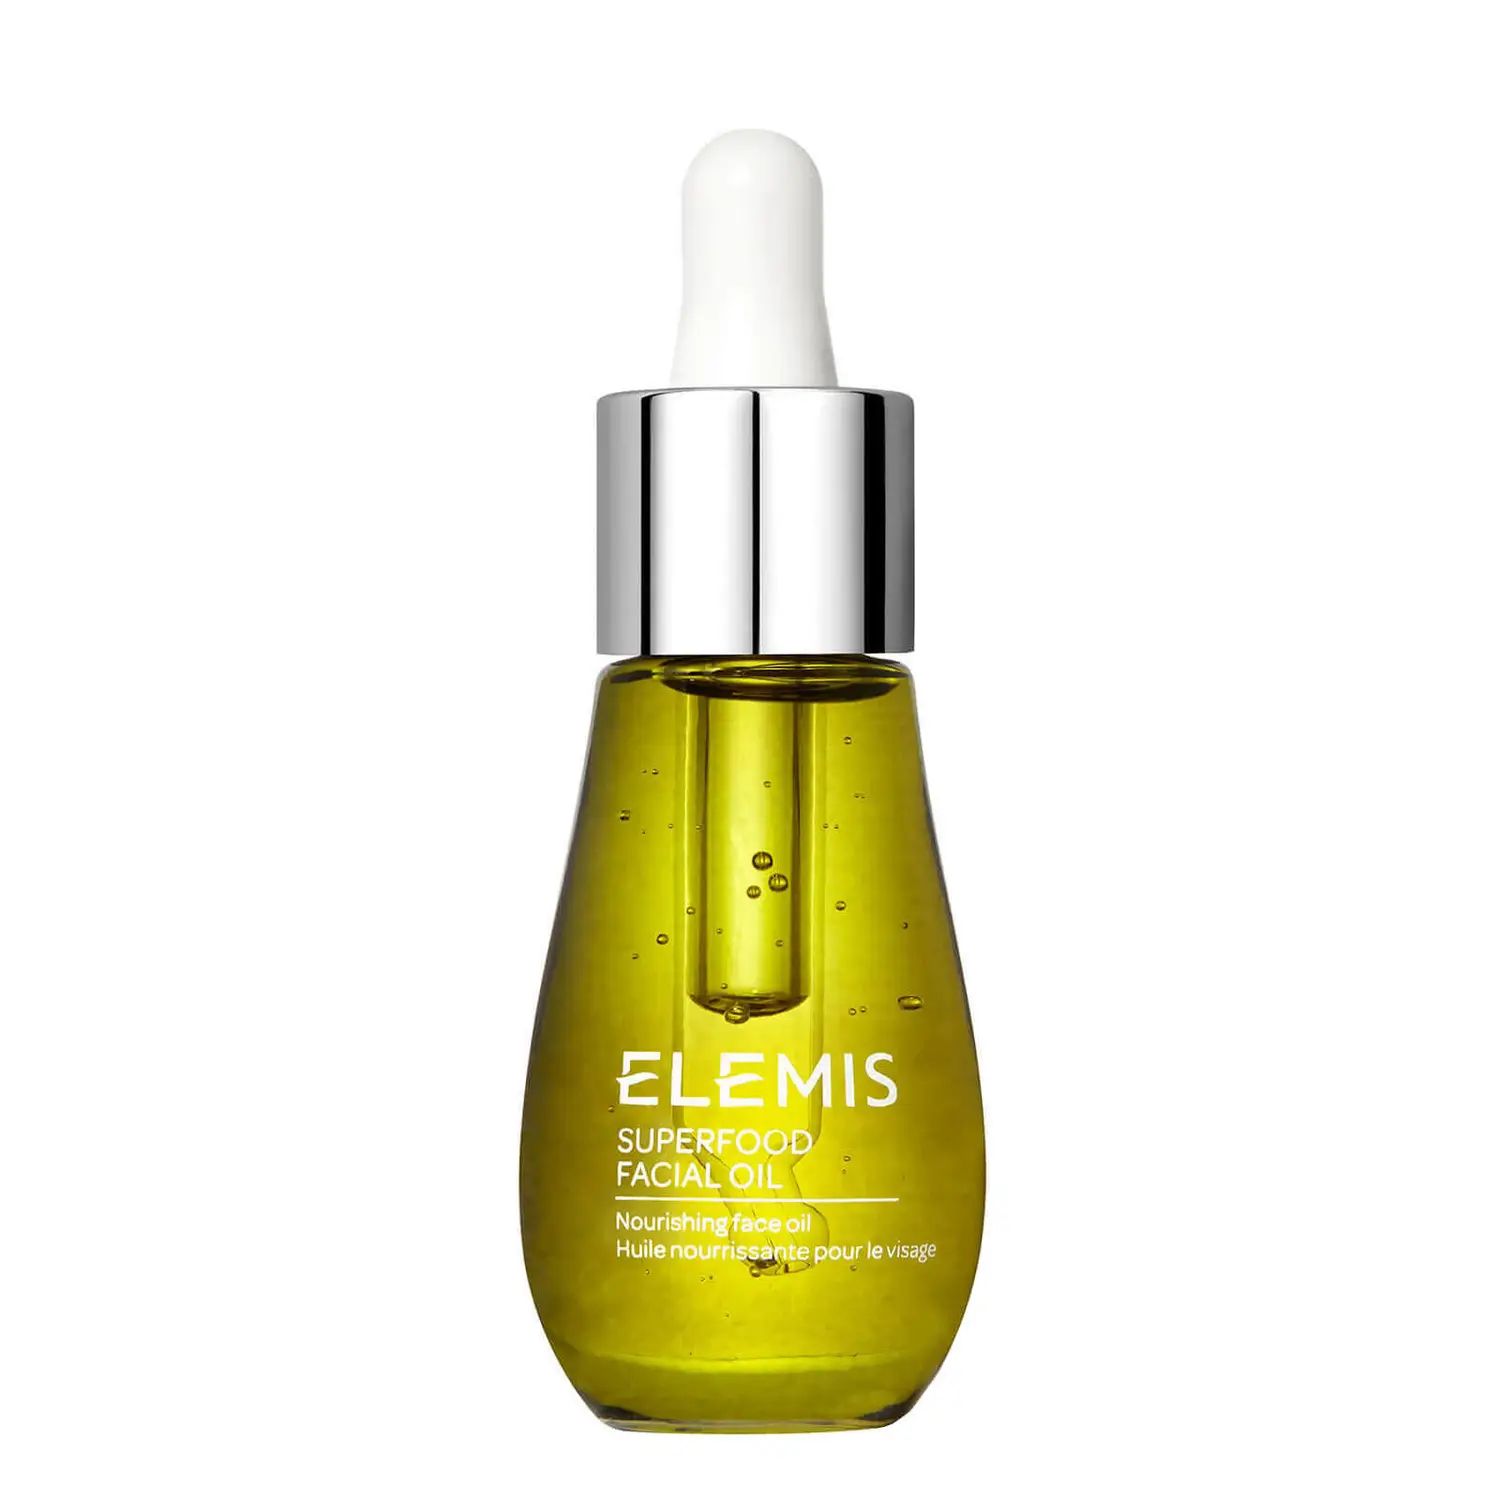 Elemis Superfood Facial Oil 15ml (New Packaging) | Cult Beauty (Global)